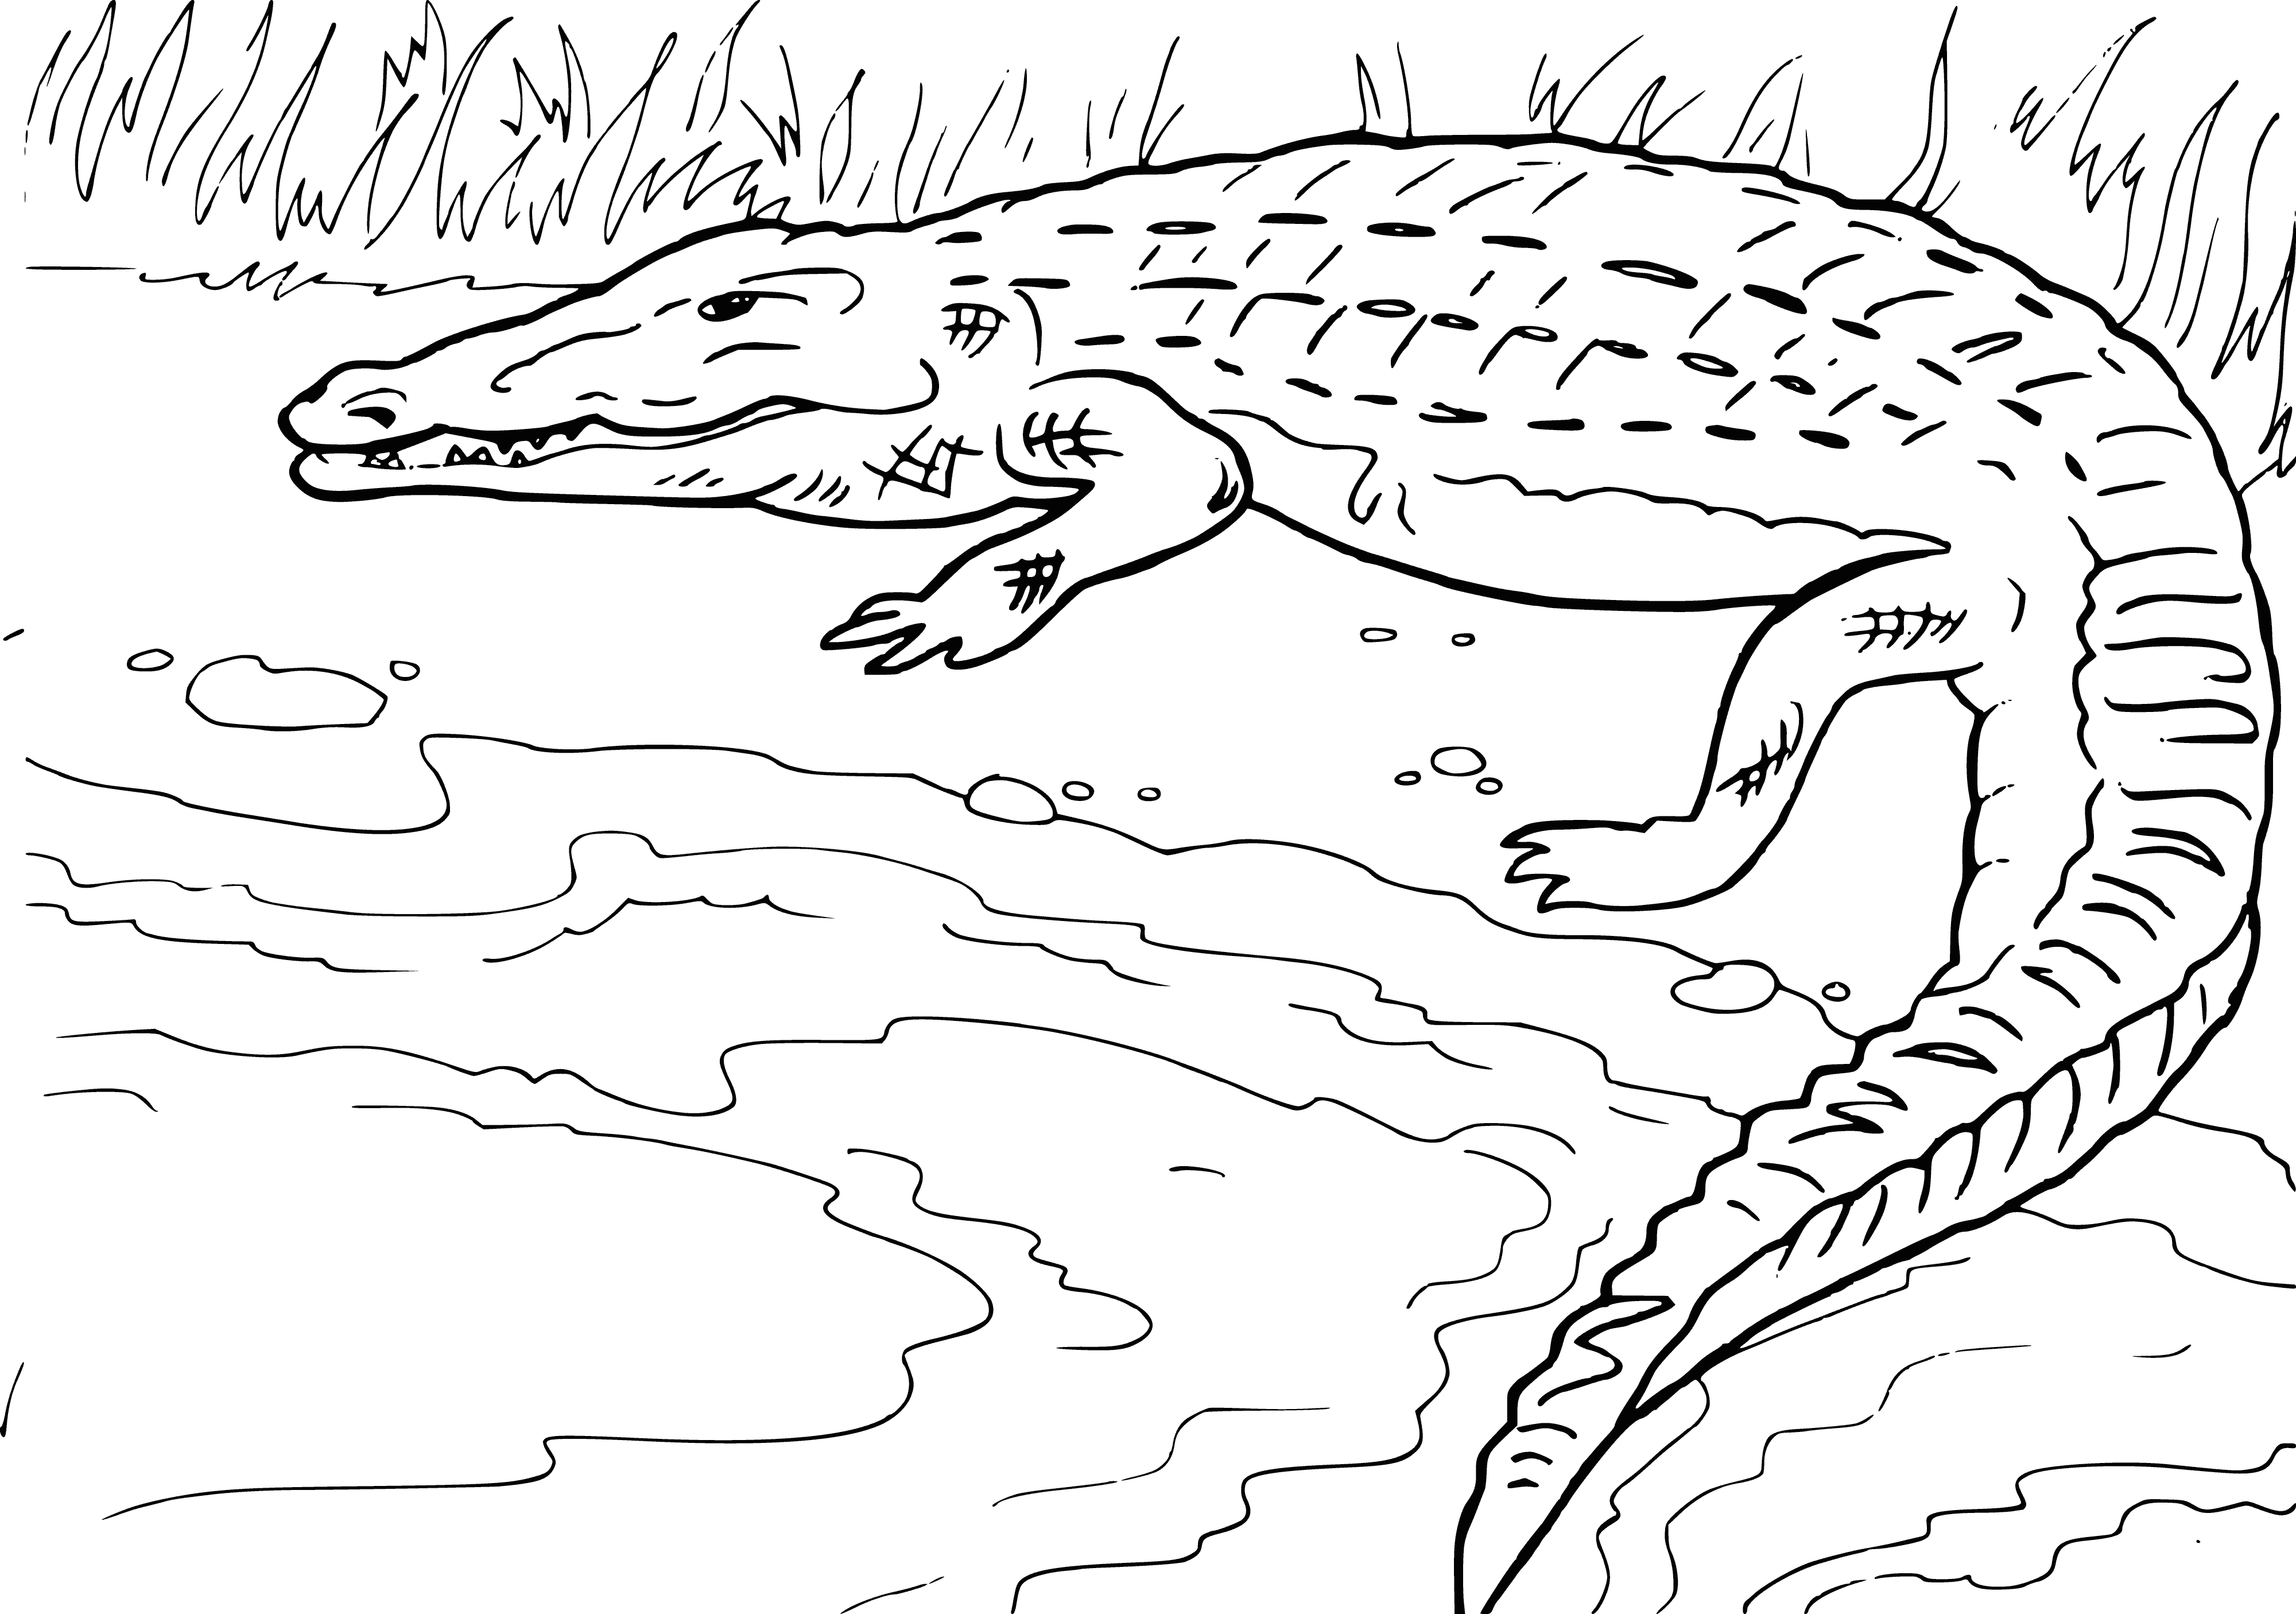 coloring page: A crocodile is a large reptile living in warm climates, with greenish-brown skin and large teeth.